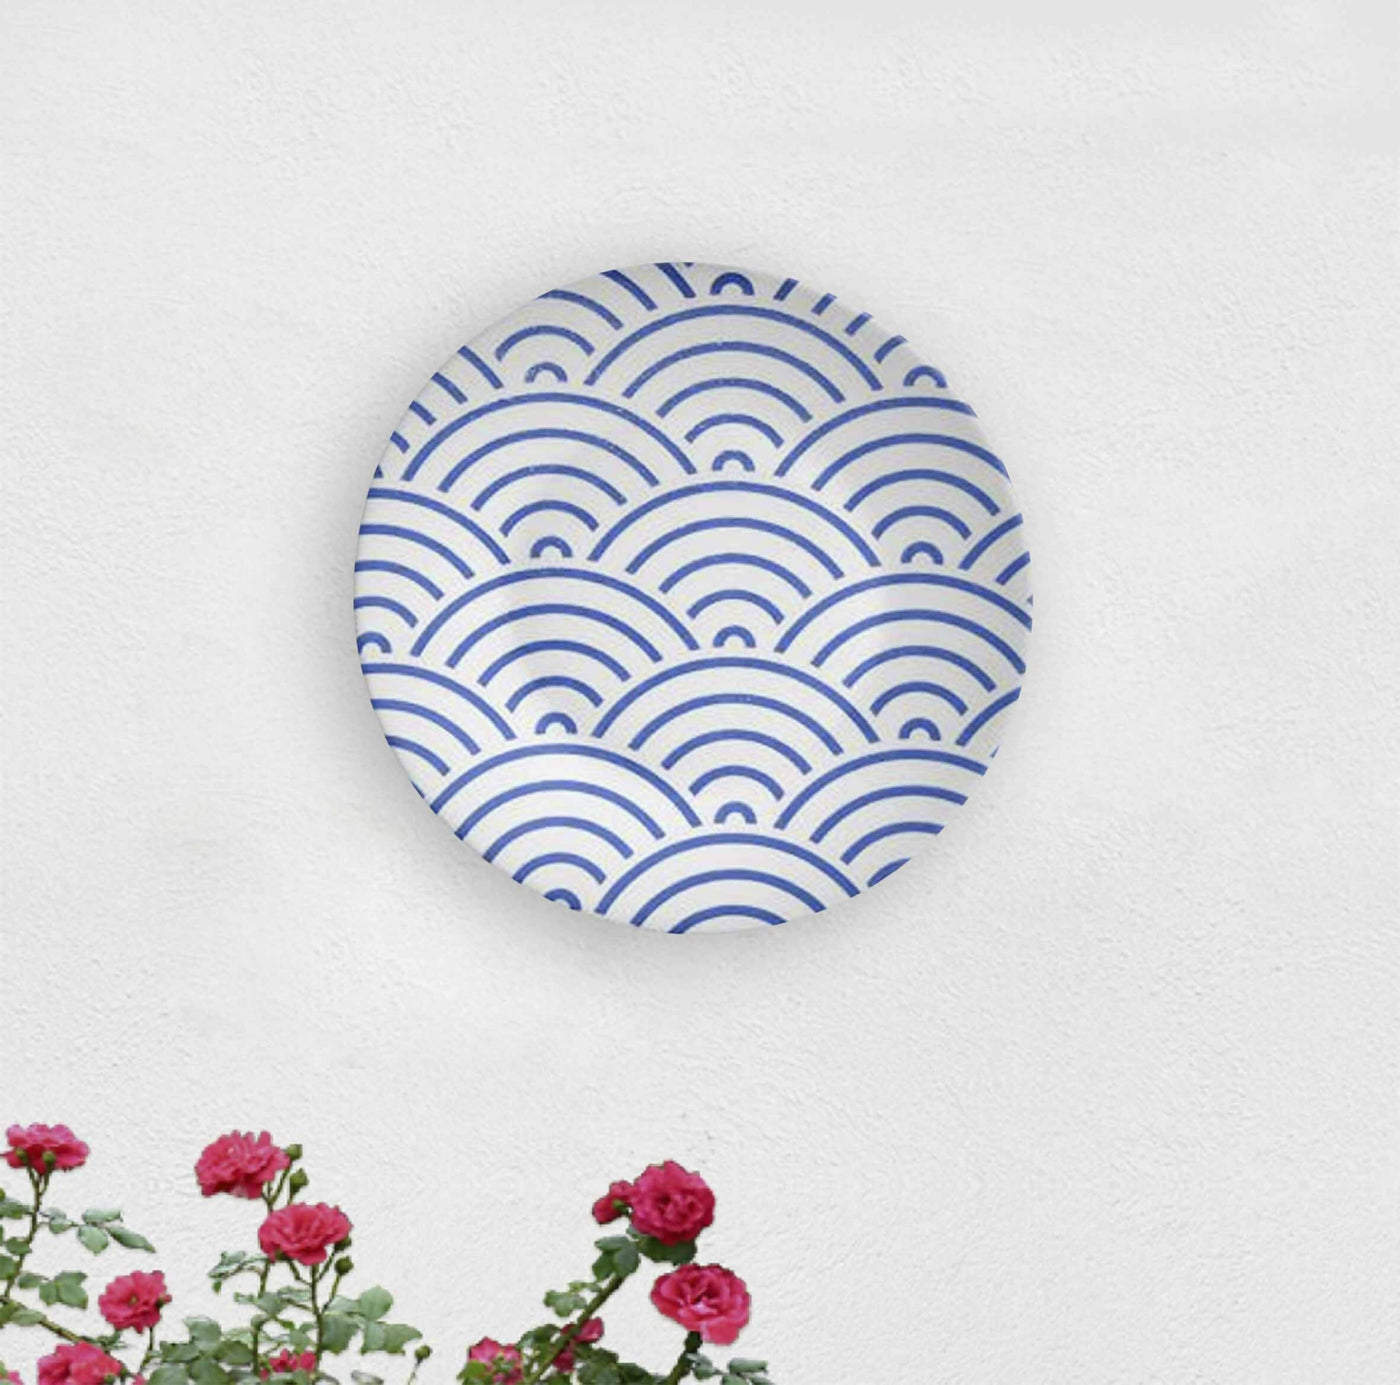 Turkish Within the Blues Decorative Wall Plate - Wall Decor - 1